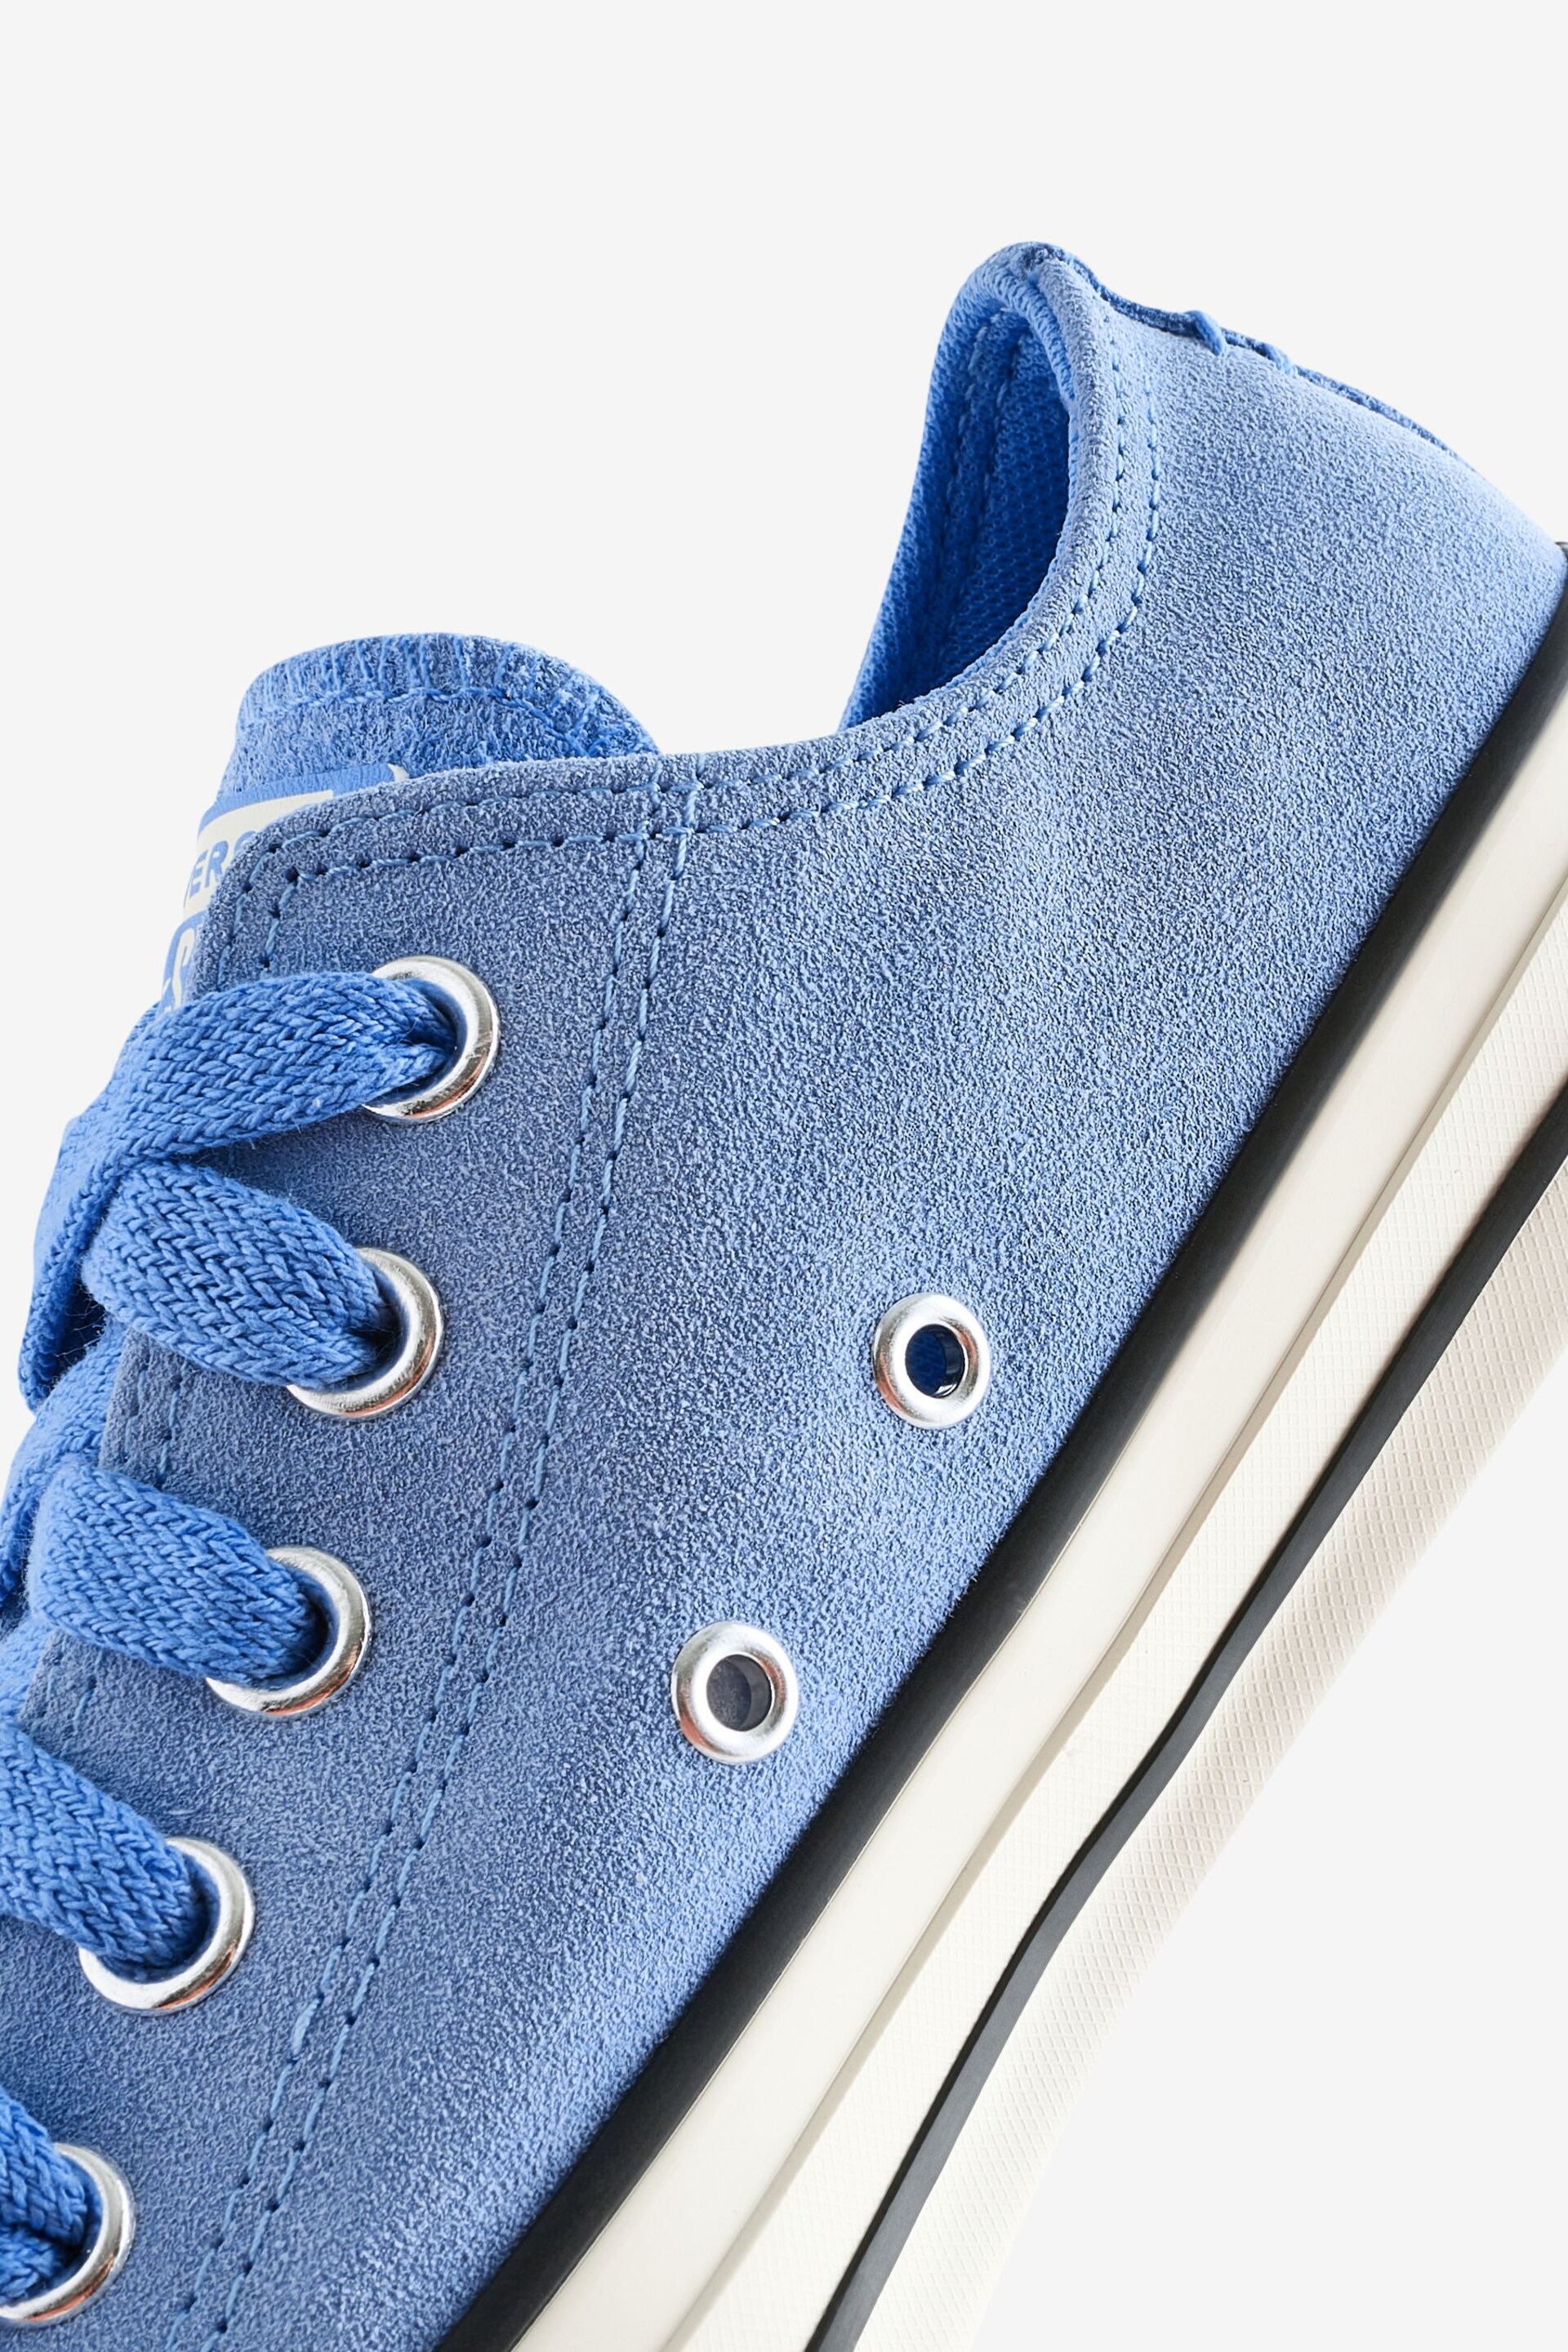 Converse Light Blue Chuck Taylor All Star Suede Ox Trainers - Image 8 of 9